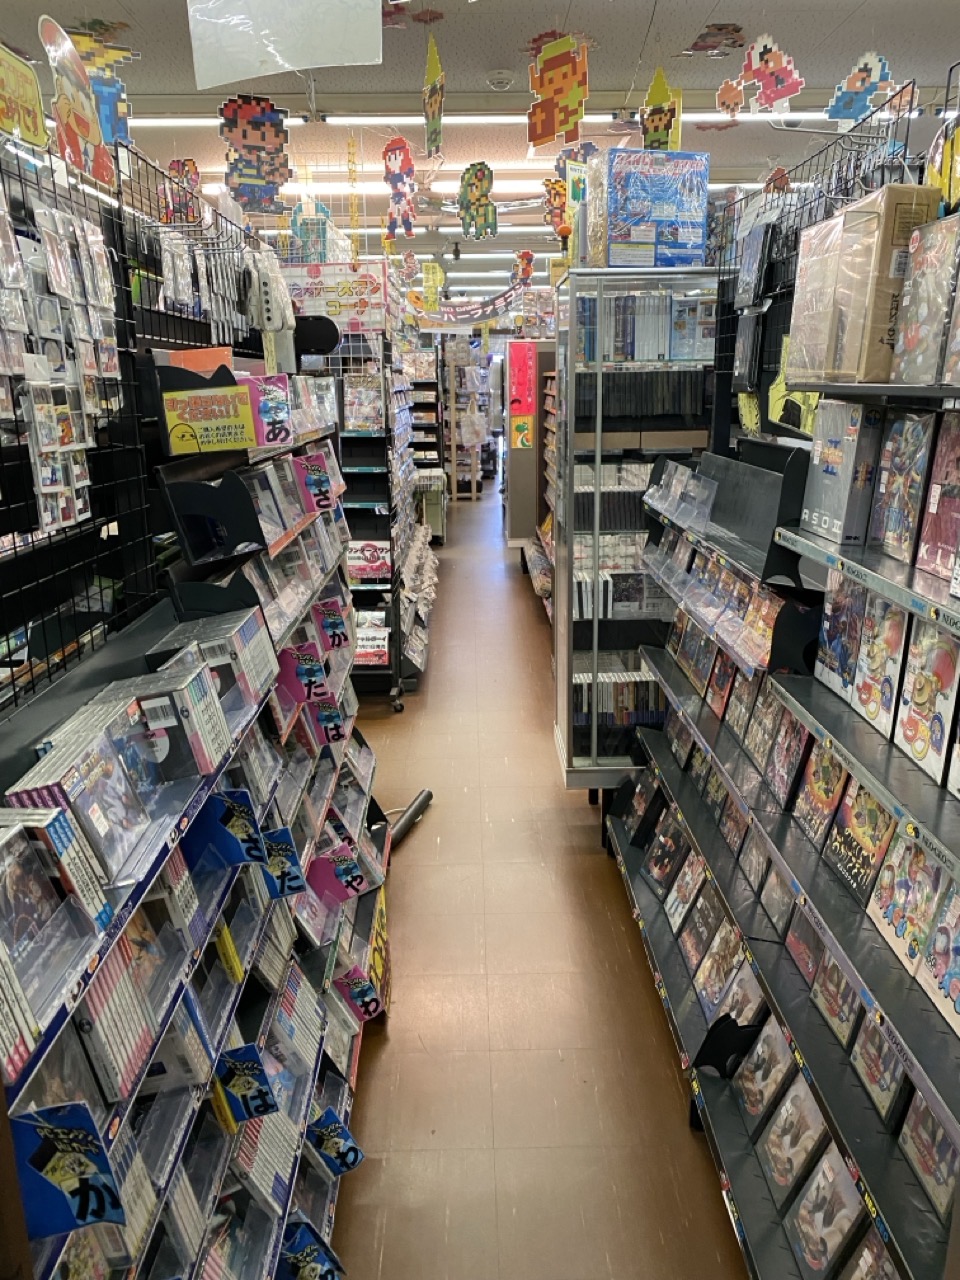 A view of one of the aisles in the store